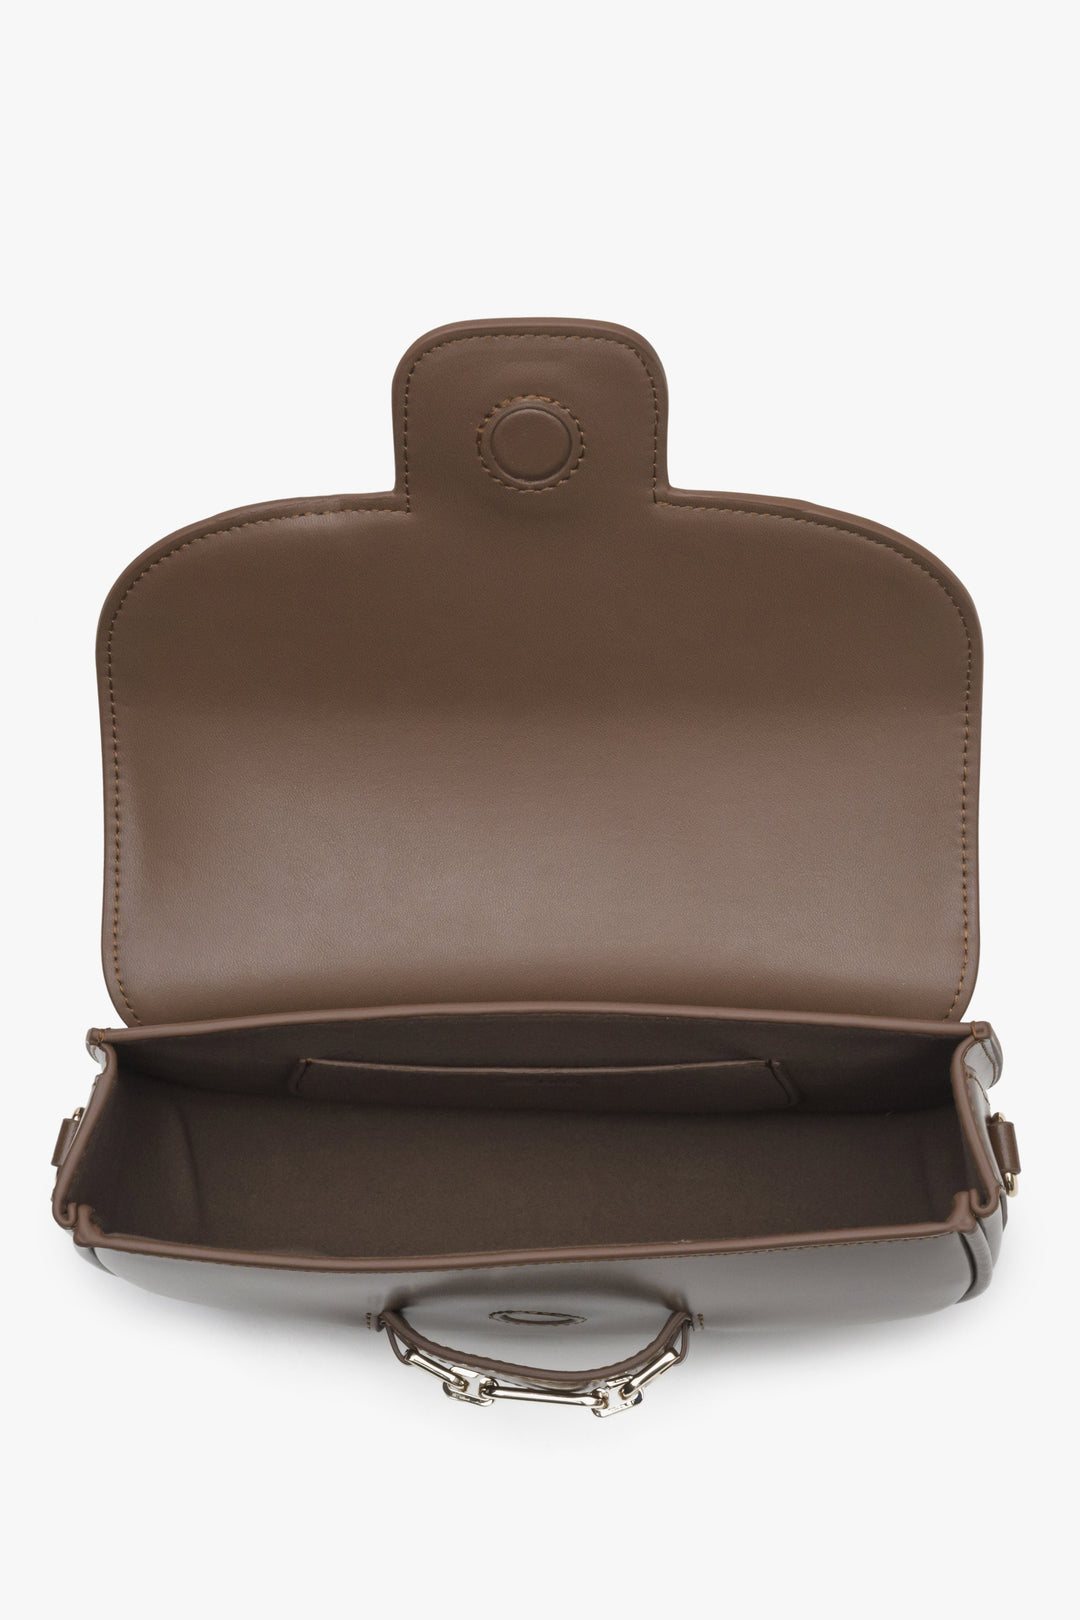 Estro women's brown bag with adjustable strap - close-up of the interior.